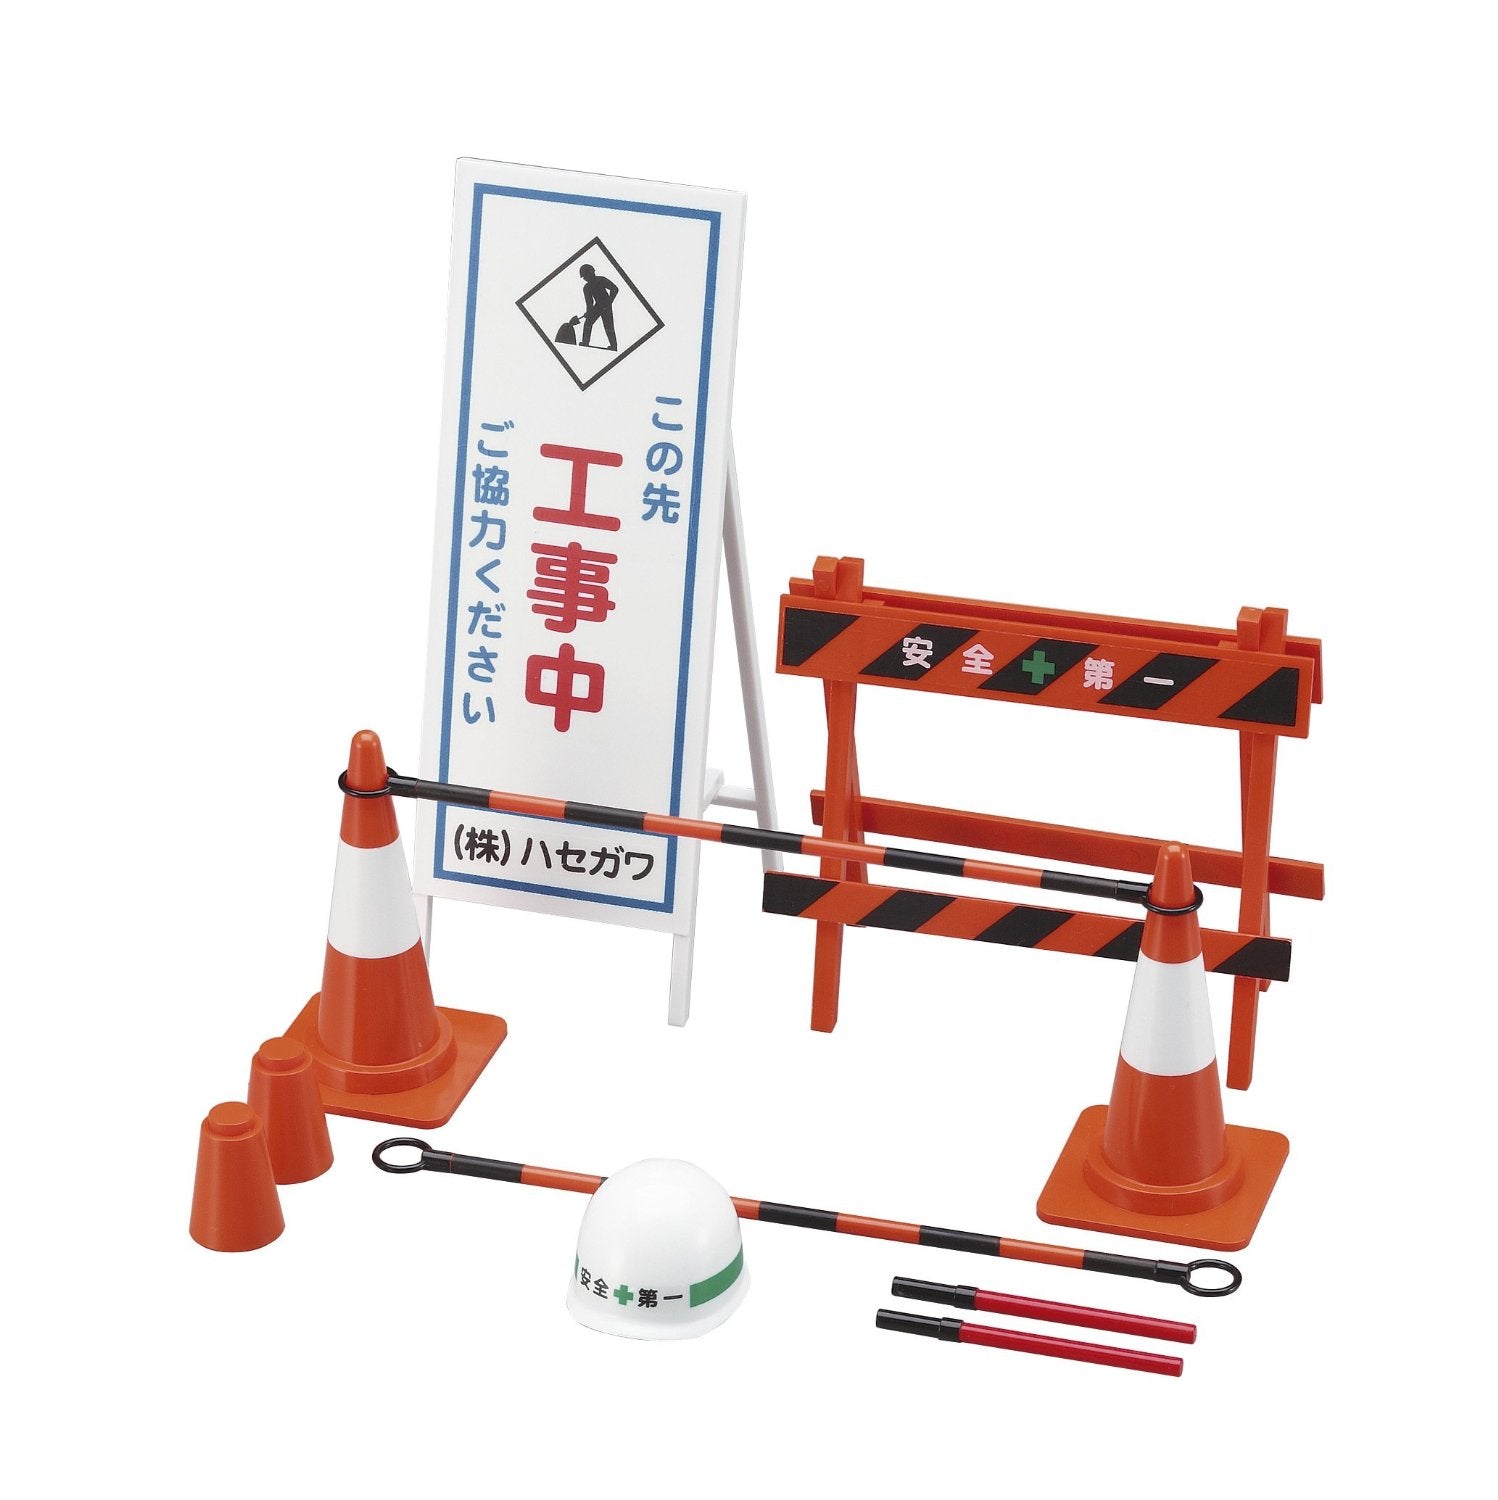 1/12 Safety Equipment for Construction